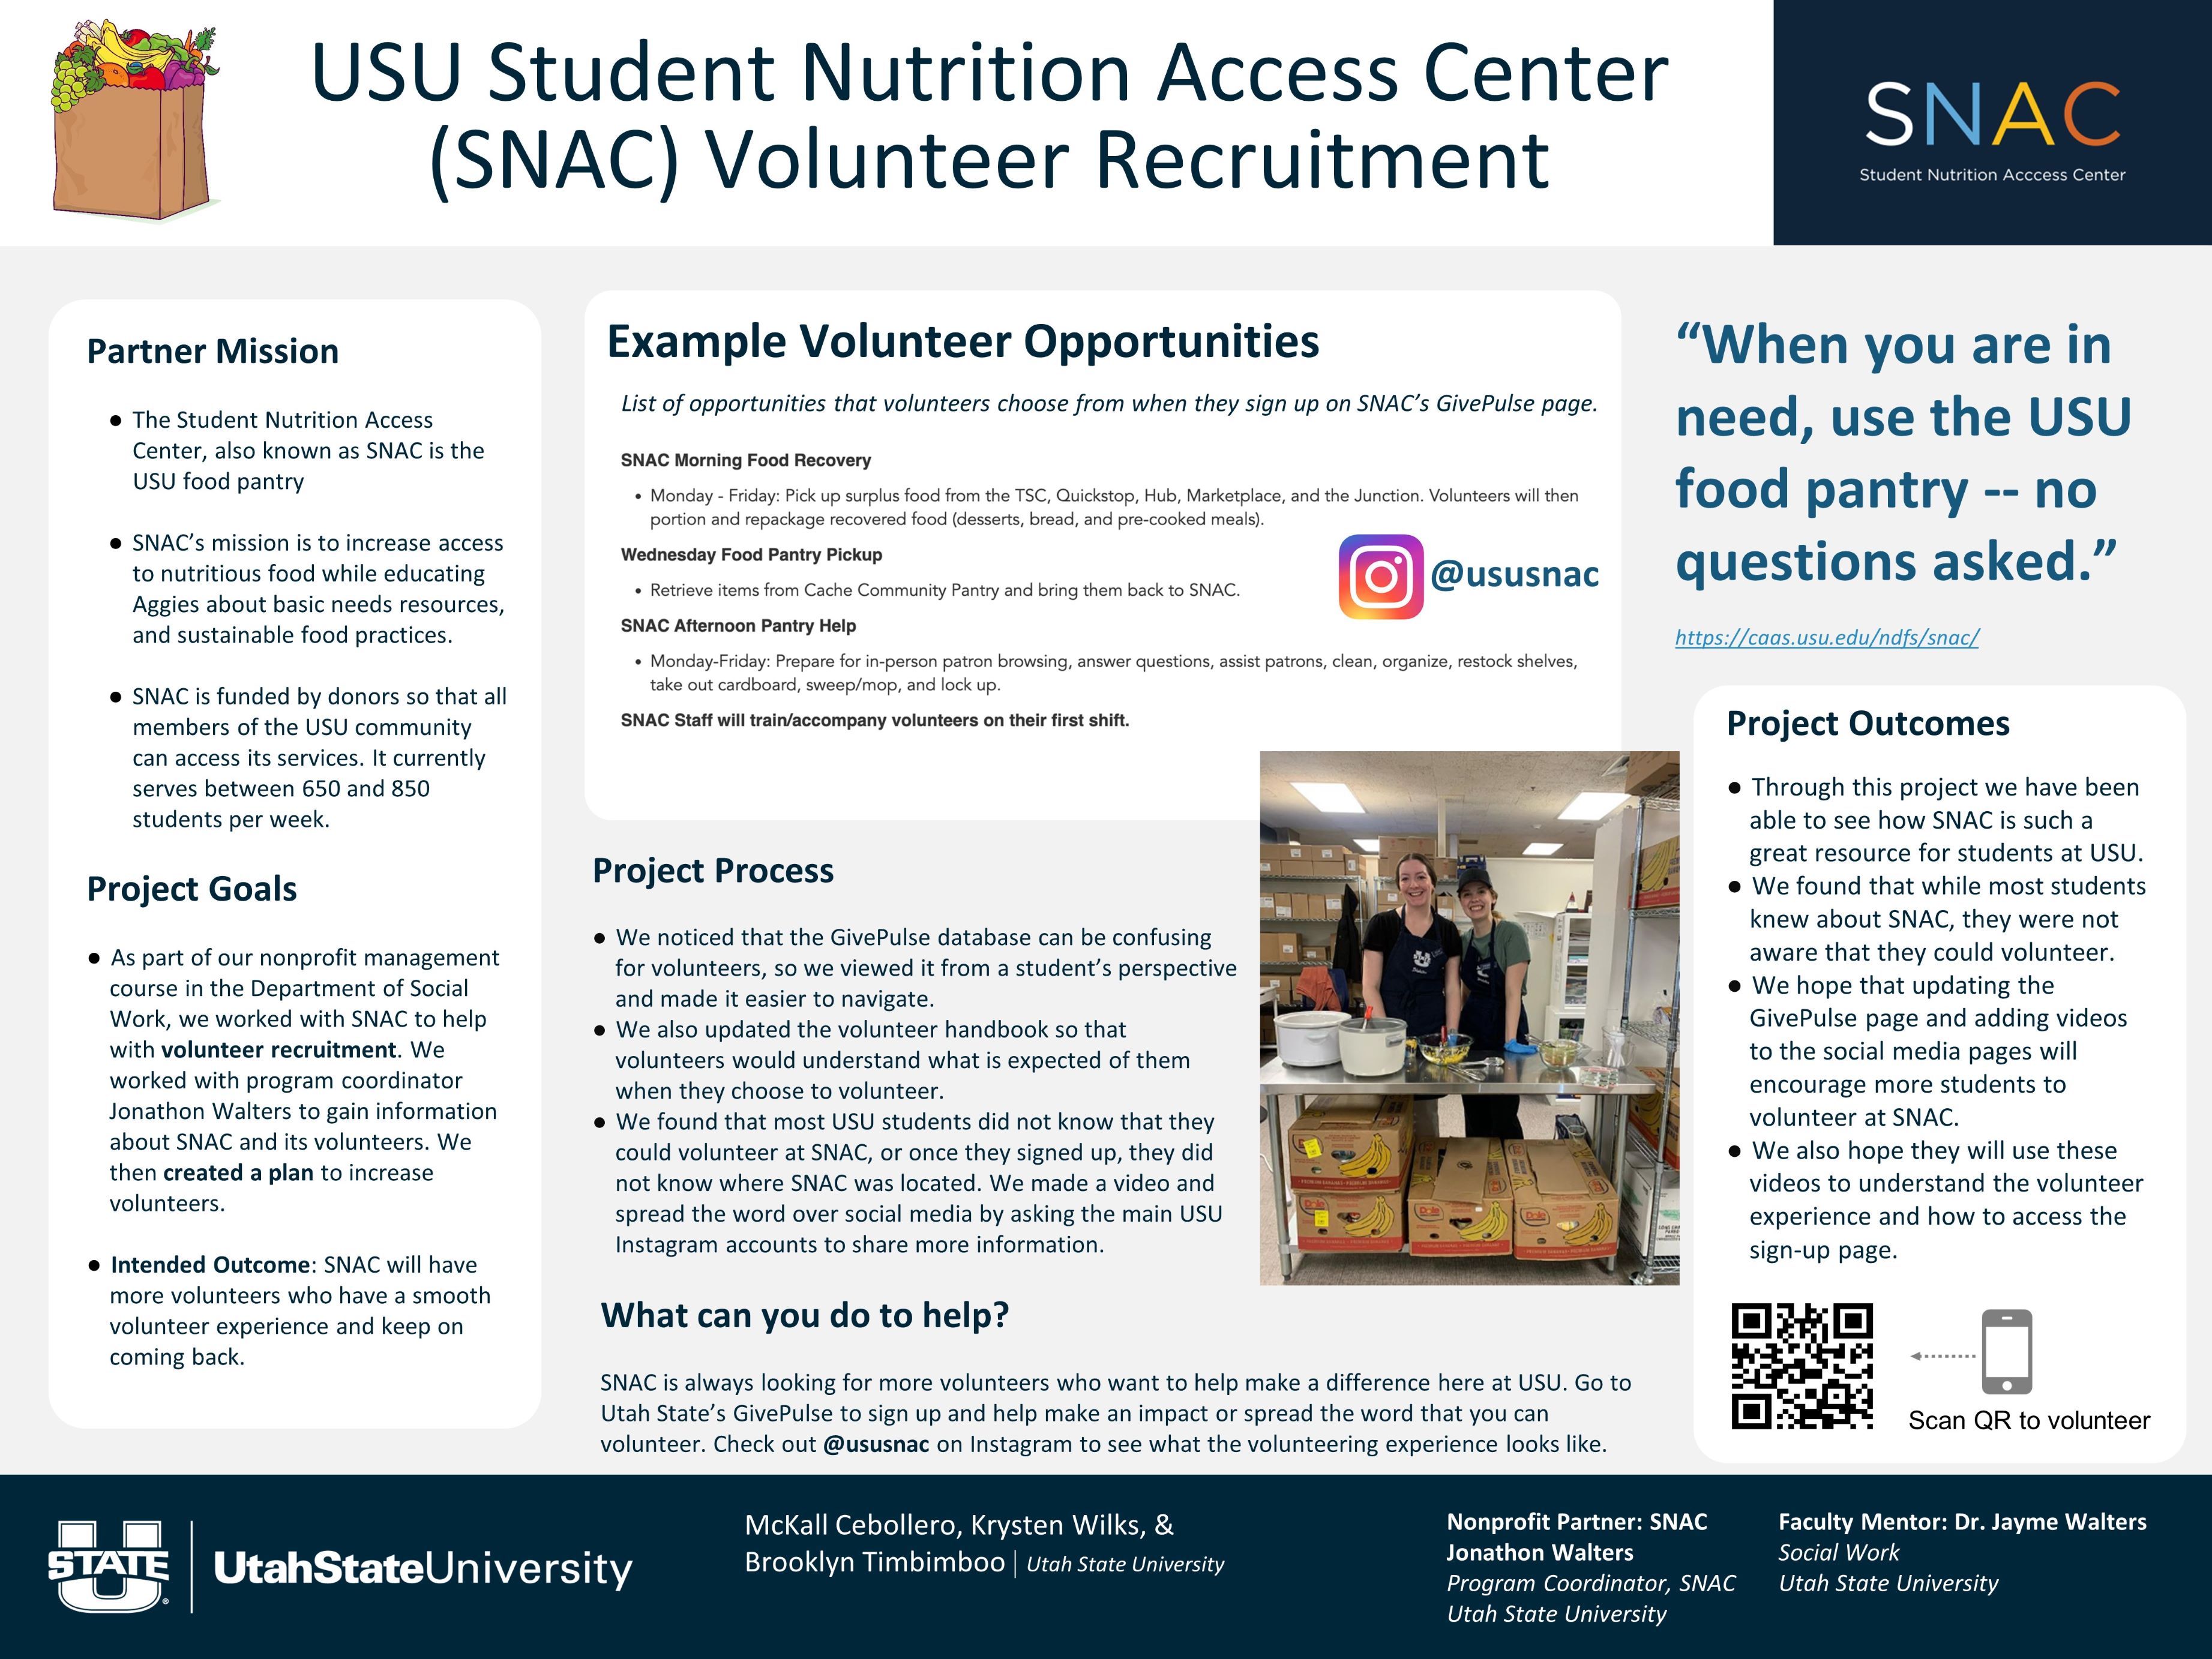 SNAC is always looking for more volunteers who want to help make a difference here at USU. Go to Utah State’s GivePulse to sign up and help make an impact or spread the word that you can volunteer. Check out @ususnac on Instagram to see what the volunteering experience looks like. 
